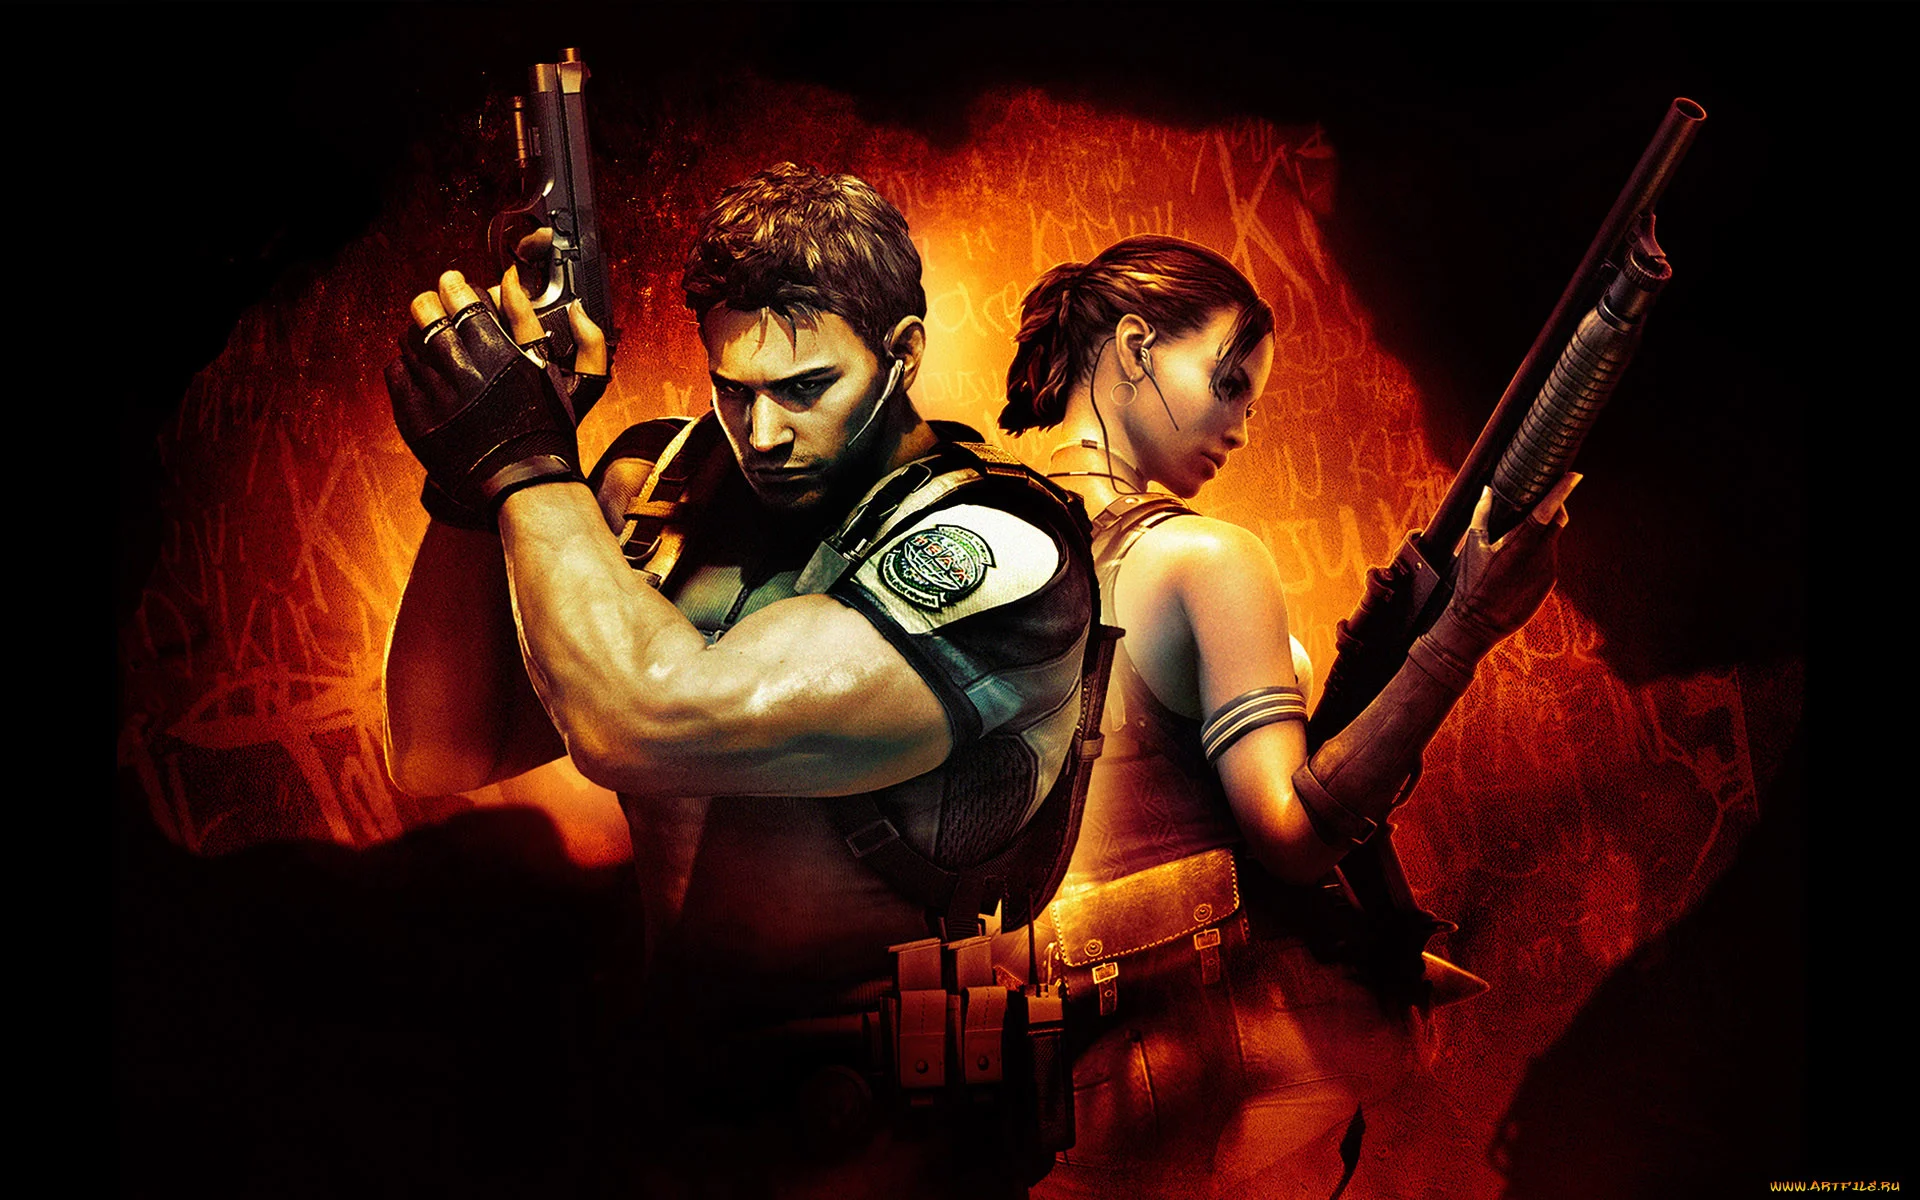 Rumors: The announcement of a Resident Evil 5 remake is just around the corner